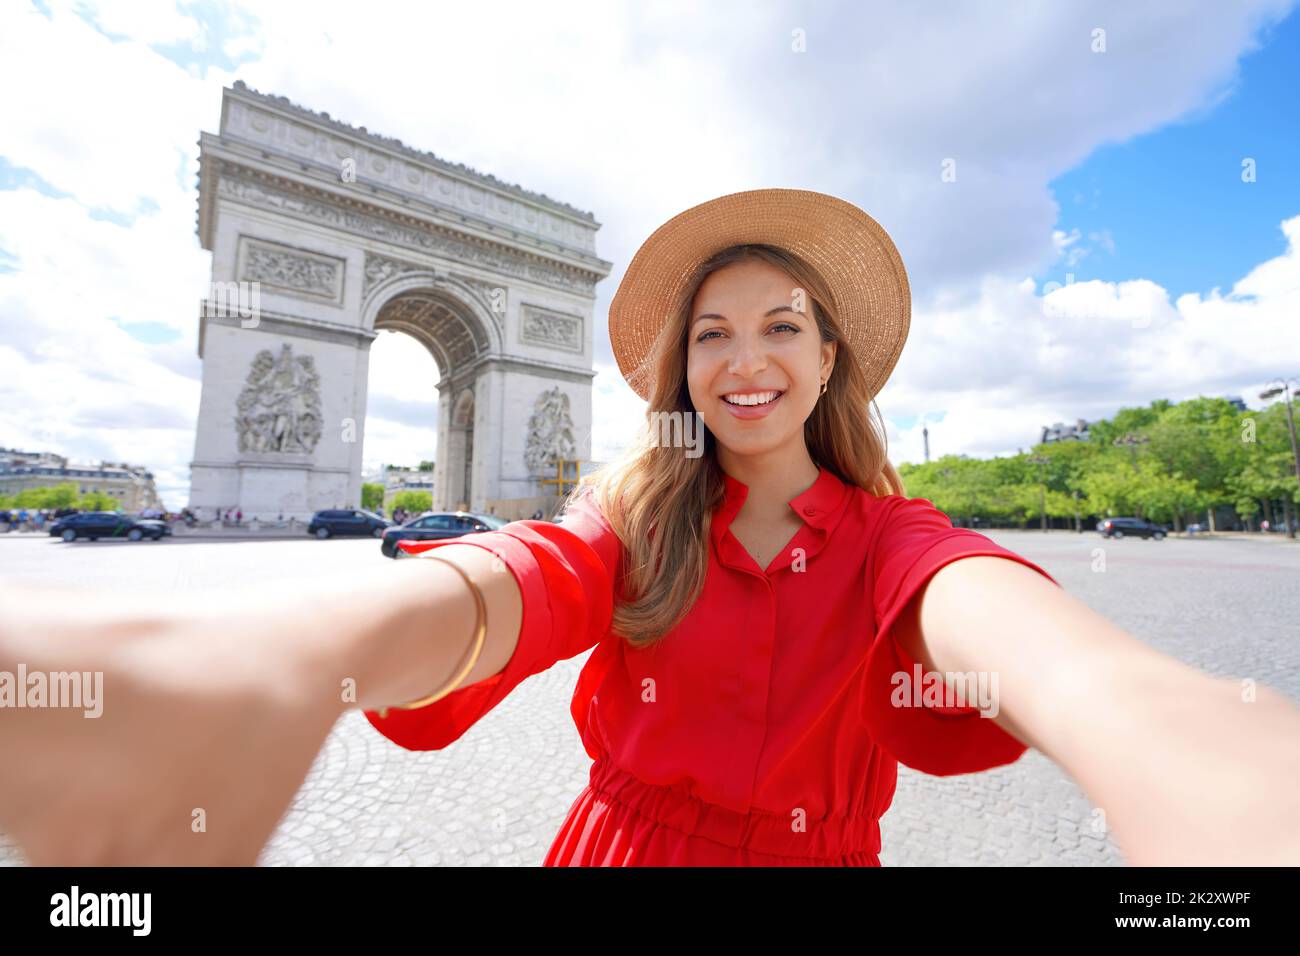 Happy young traveler woman taking selfie photo with Arc de Triomphe in Paris, France Stock Photo